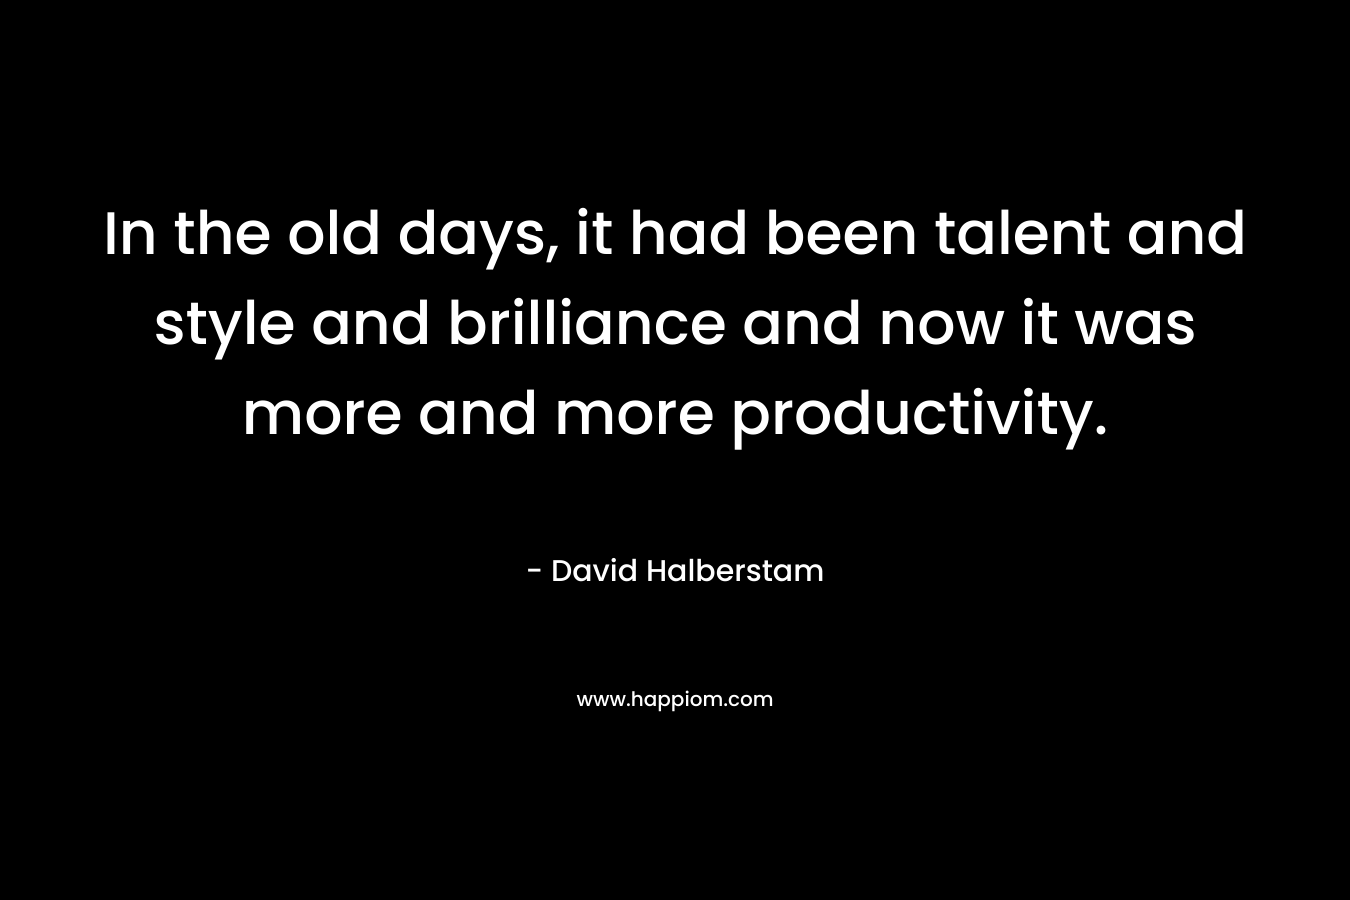 In the old days, it had been talent and style and brilliance and now it was more and more productivity. – David Halberstam